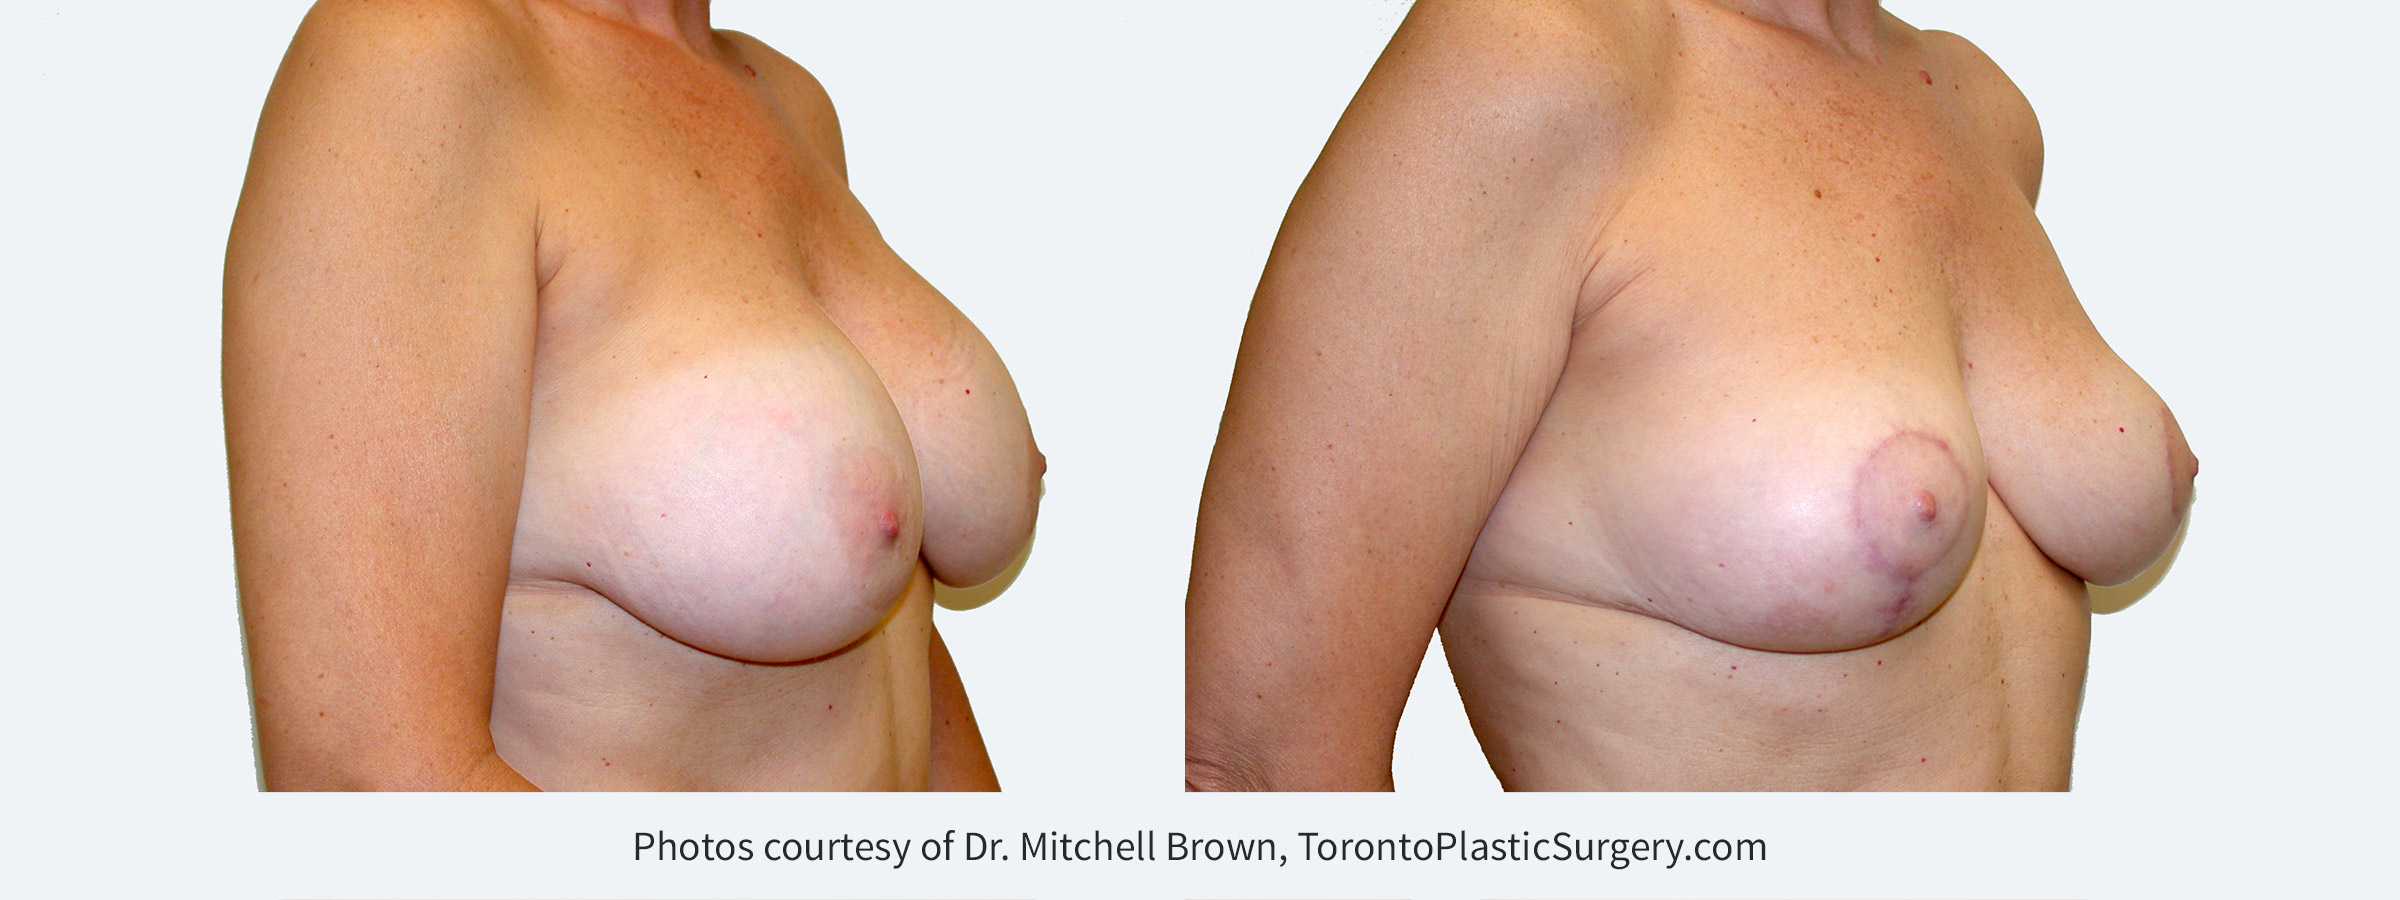 Recurrent capsular contracture treated with implant removal and reshaping of the breasts with a breast lift and fat grafting. Before and 6 months after